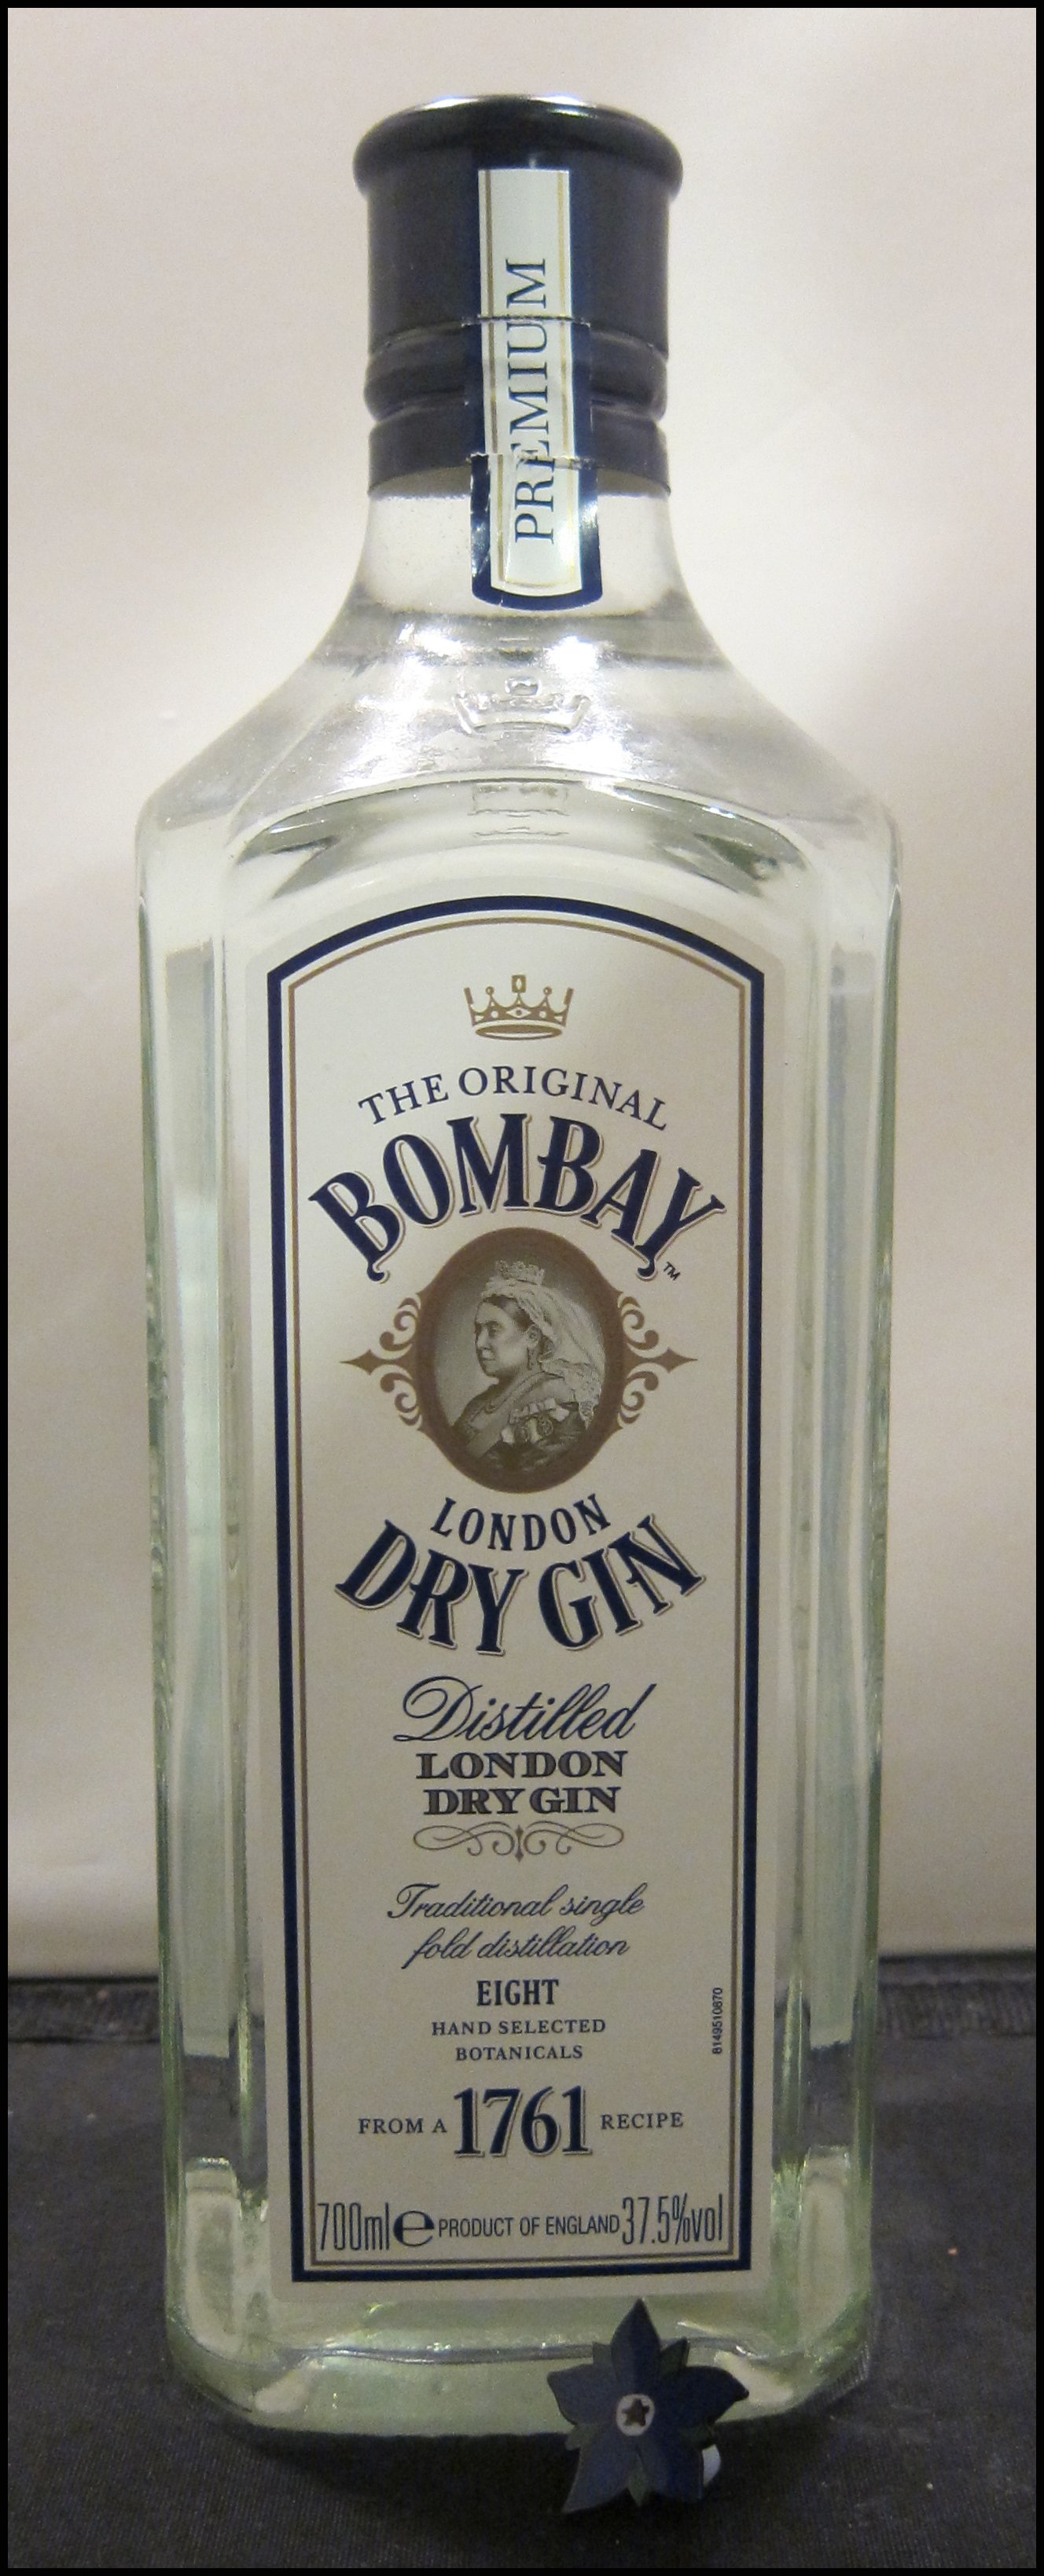 | Gin with… Cocktails Cup Fruit ABV) Bombay (37.5% Summer Dry